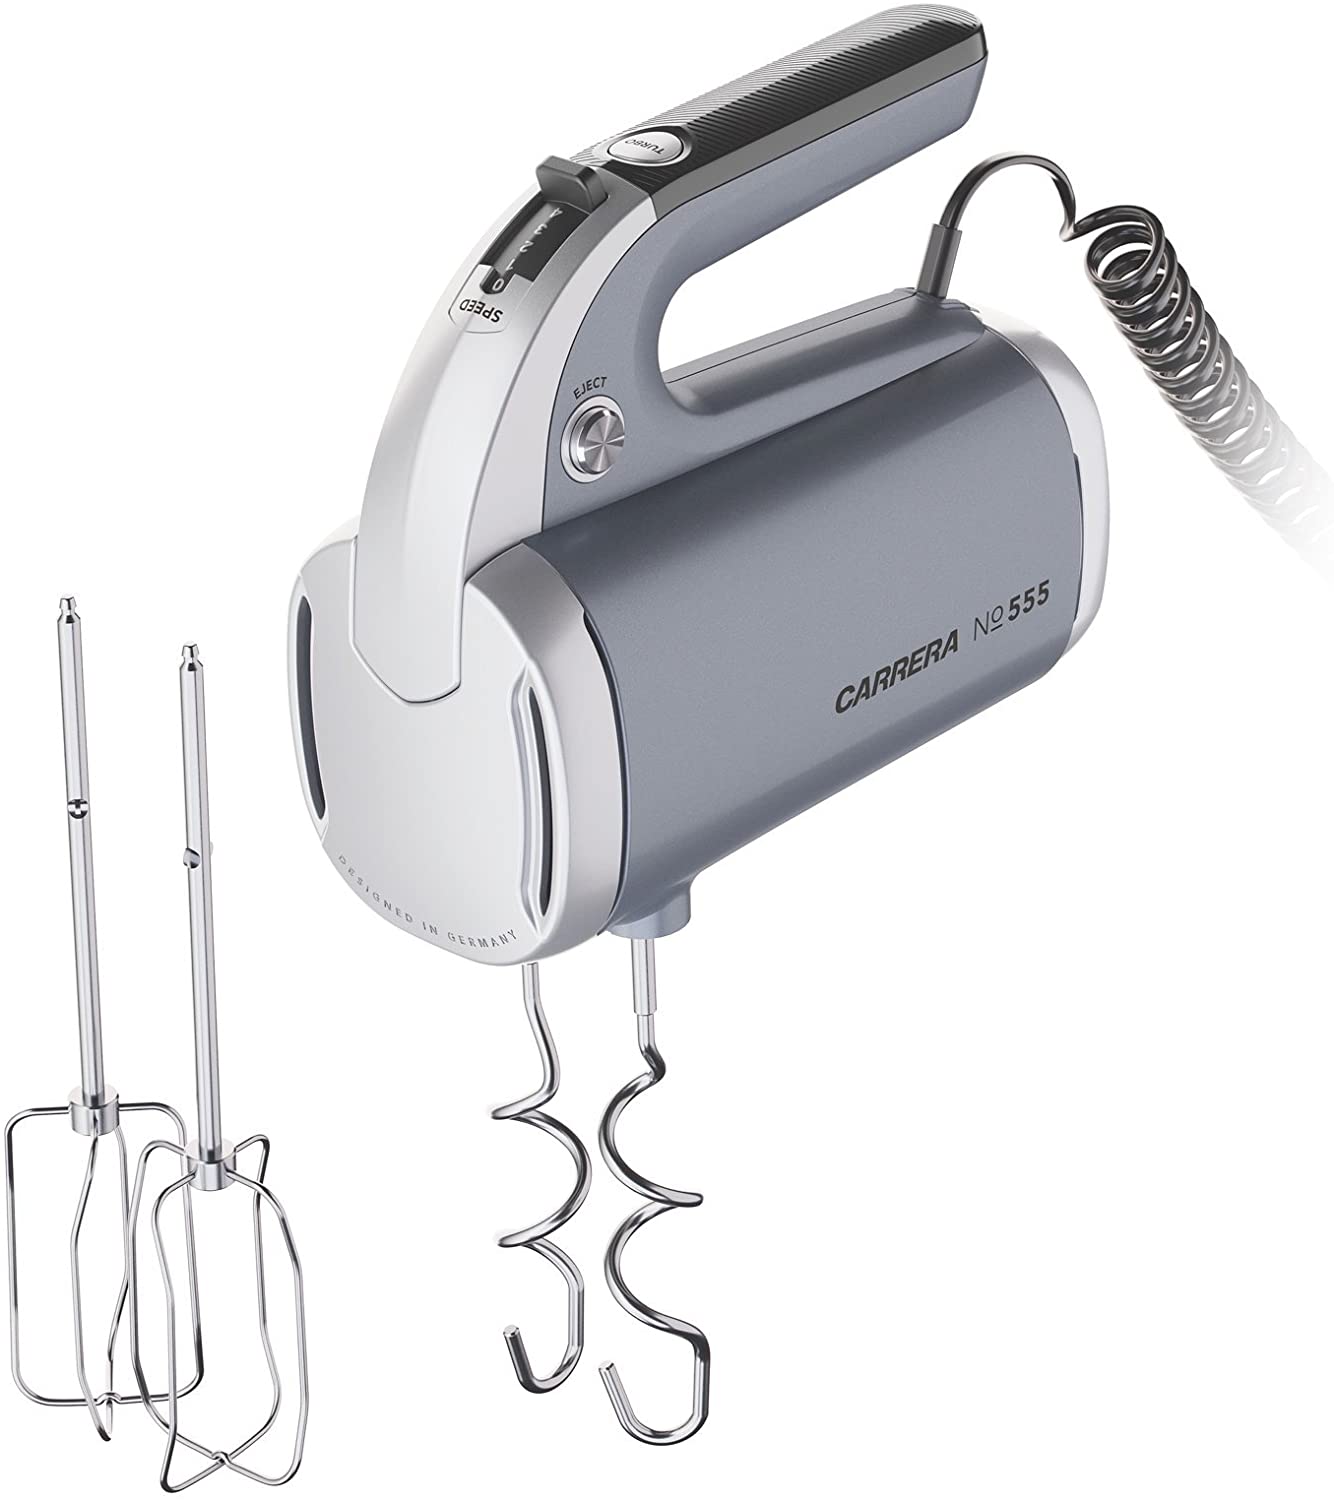 CARRERA Electric hand mixer no. 555, 2 attachments (whisk and dough hook made of stainless steel).